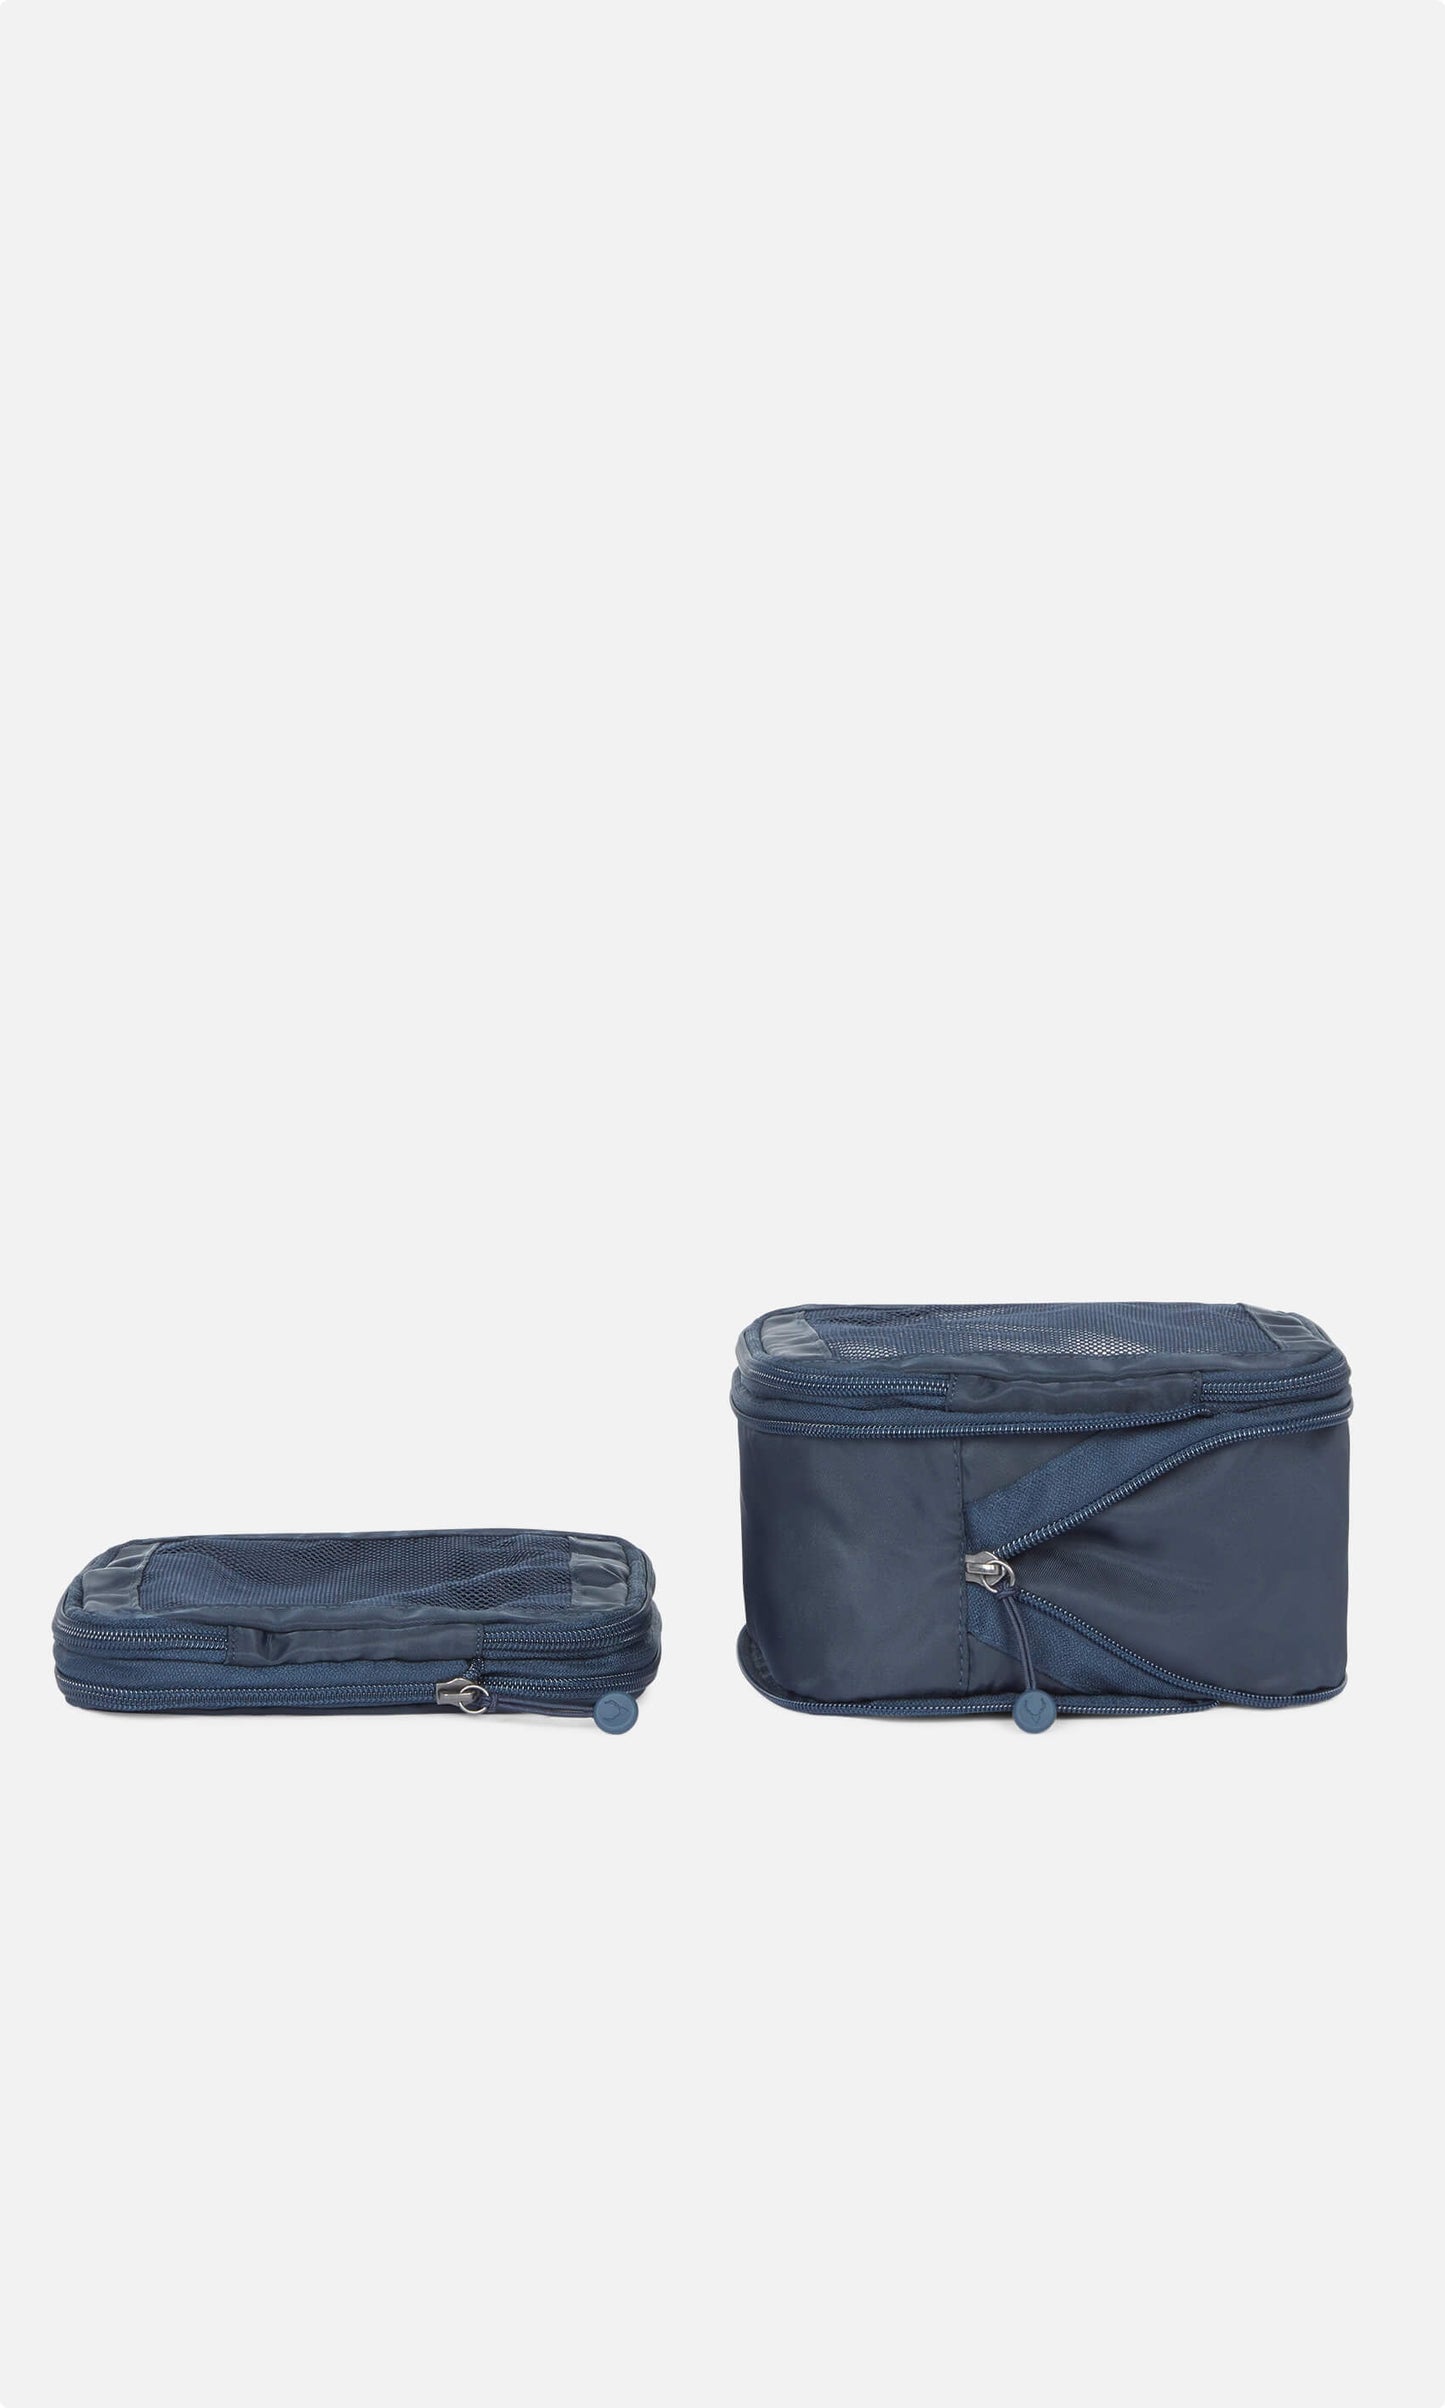 Chelsea 4 Packing Cubes in Navy